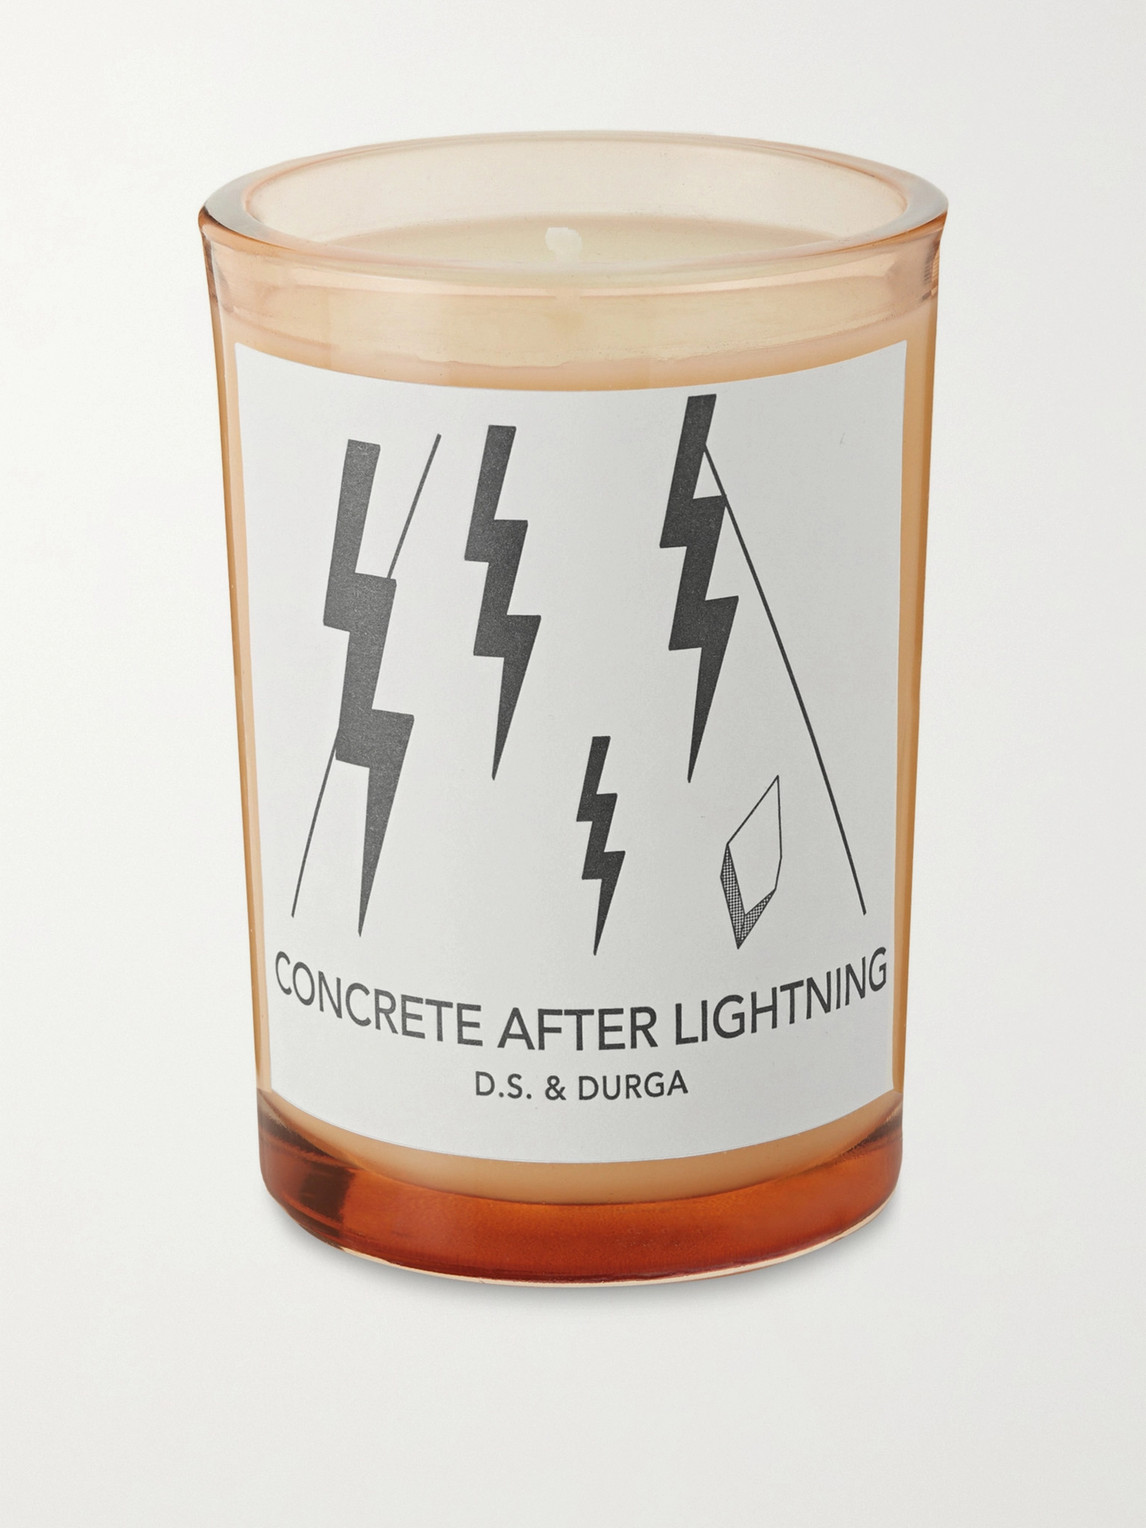 D.S. & DURGA CONCRETE AFTER LIGHTNING SCENTED CANDLE, 200G